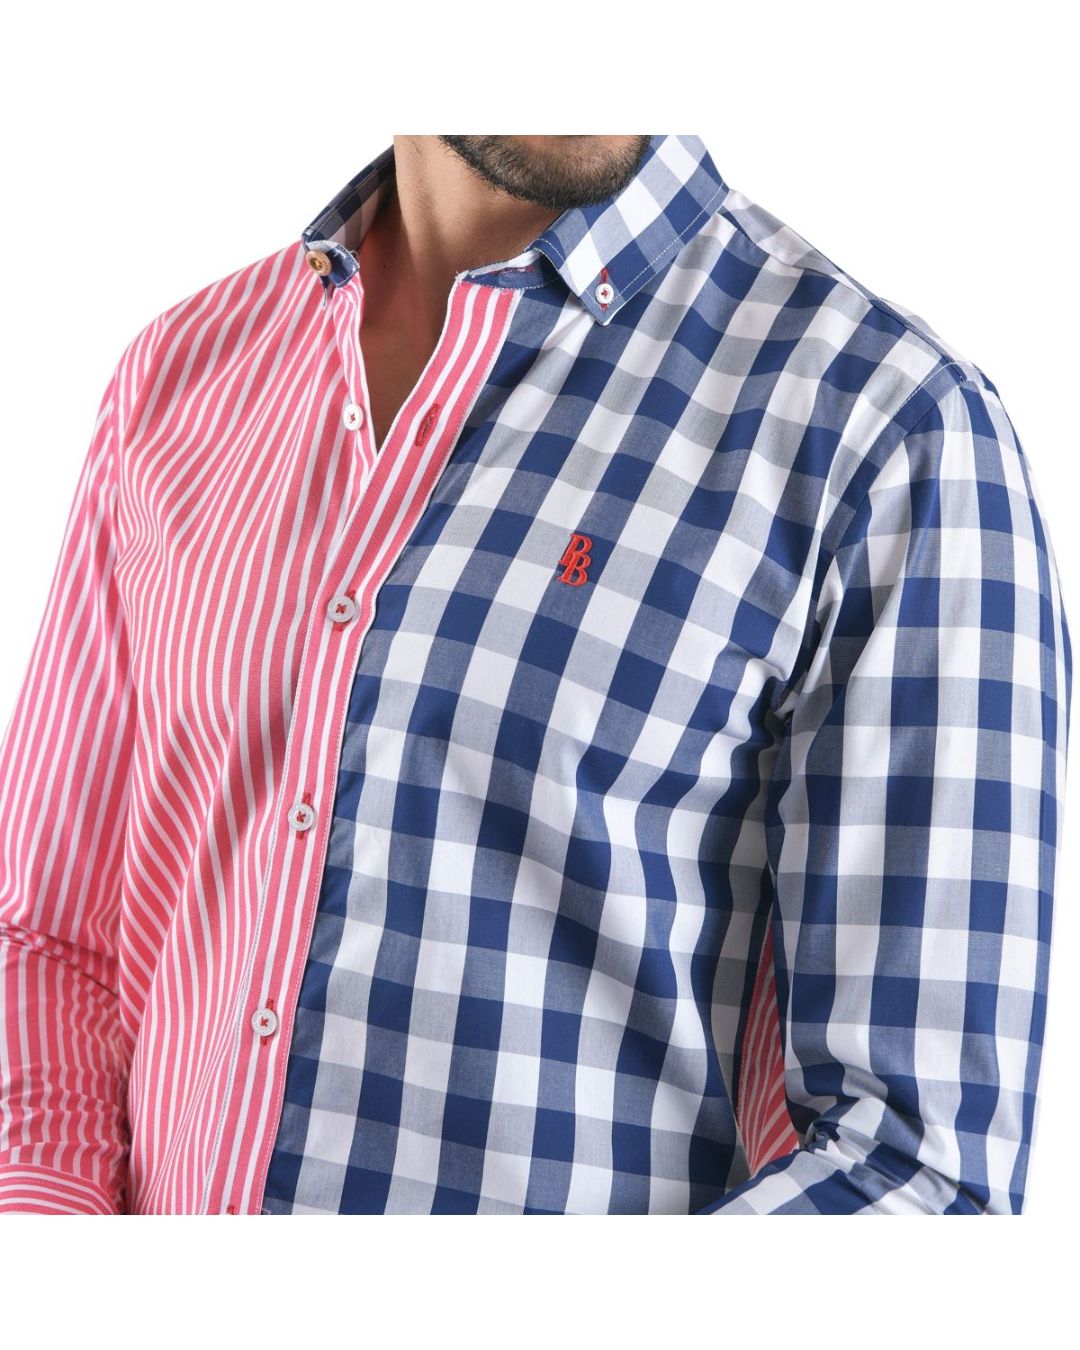 Men's Patchwork Long Sleeve Button Down Shirt White Blue & Red